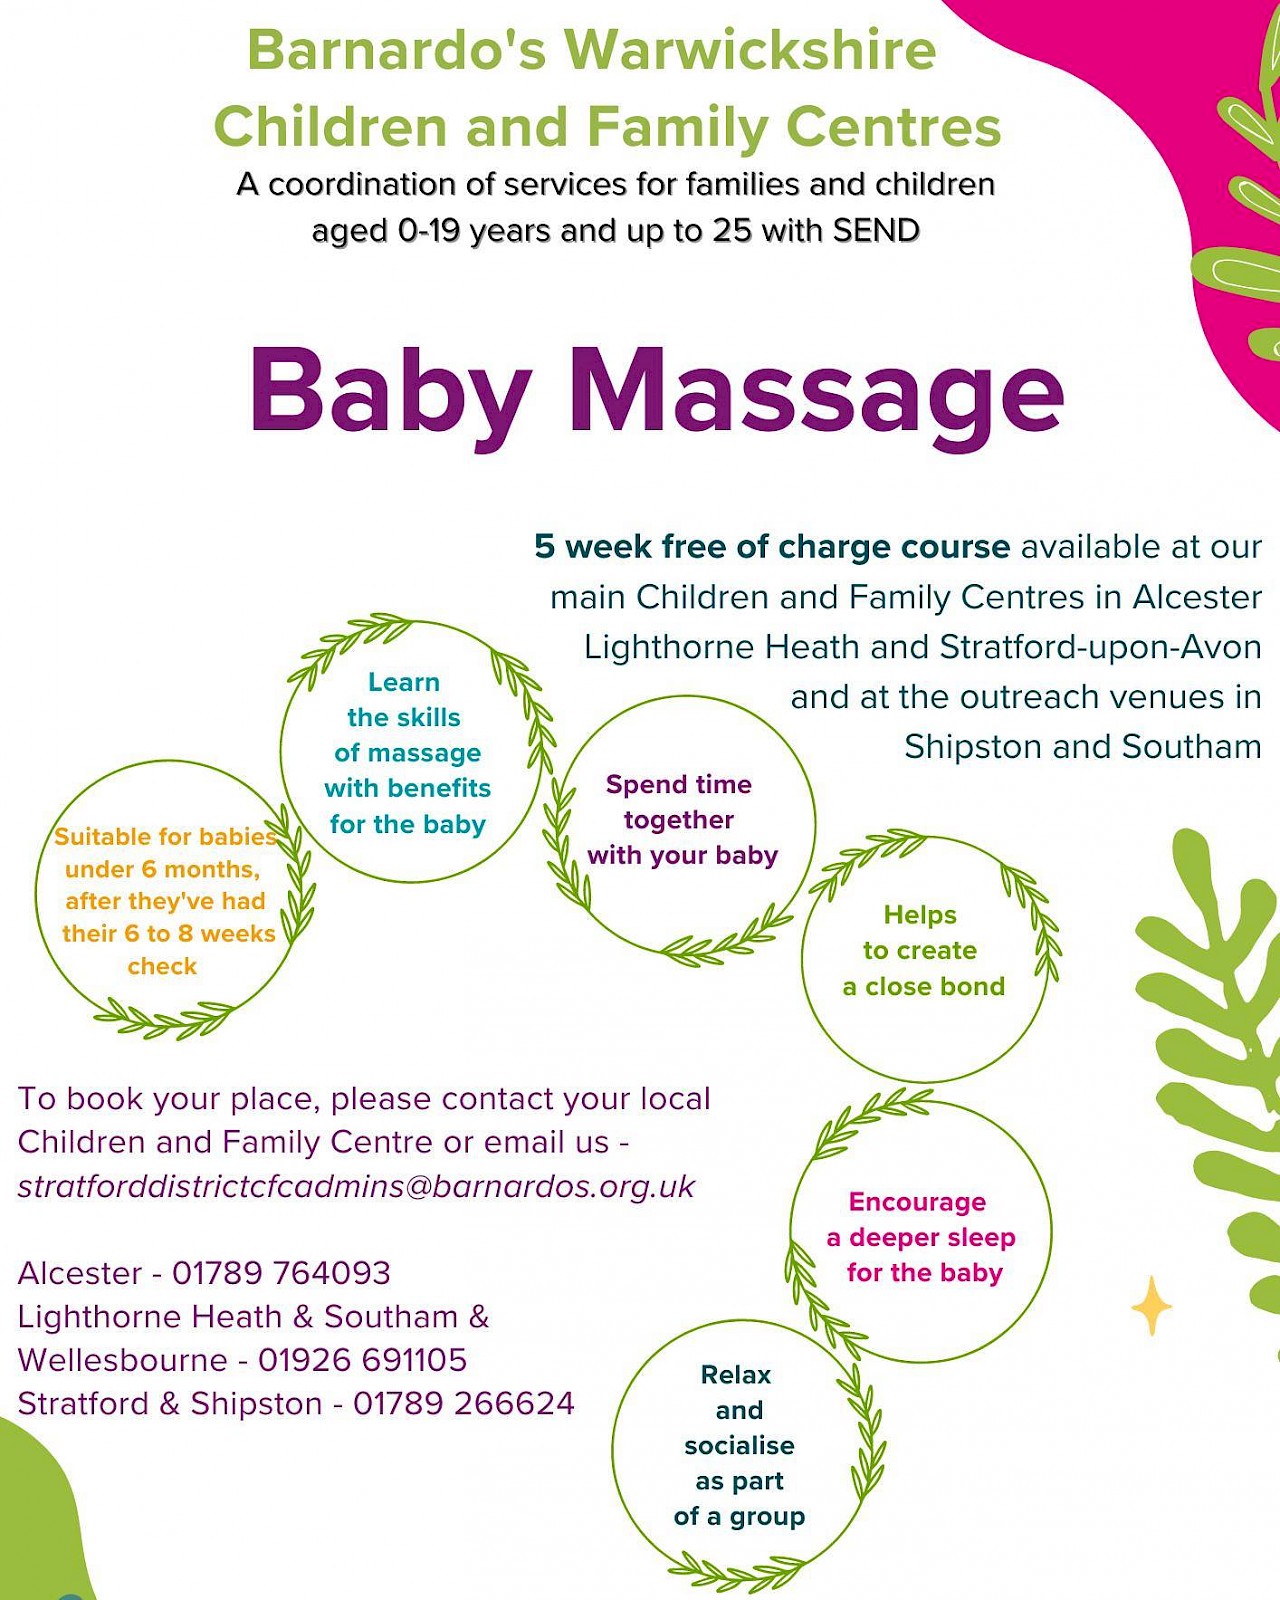 Baby Massage - 5 week free of charge course